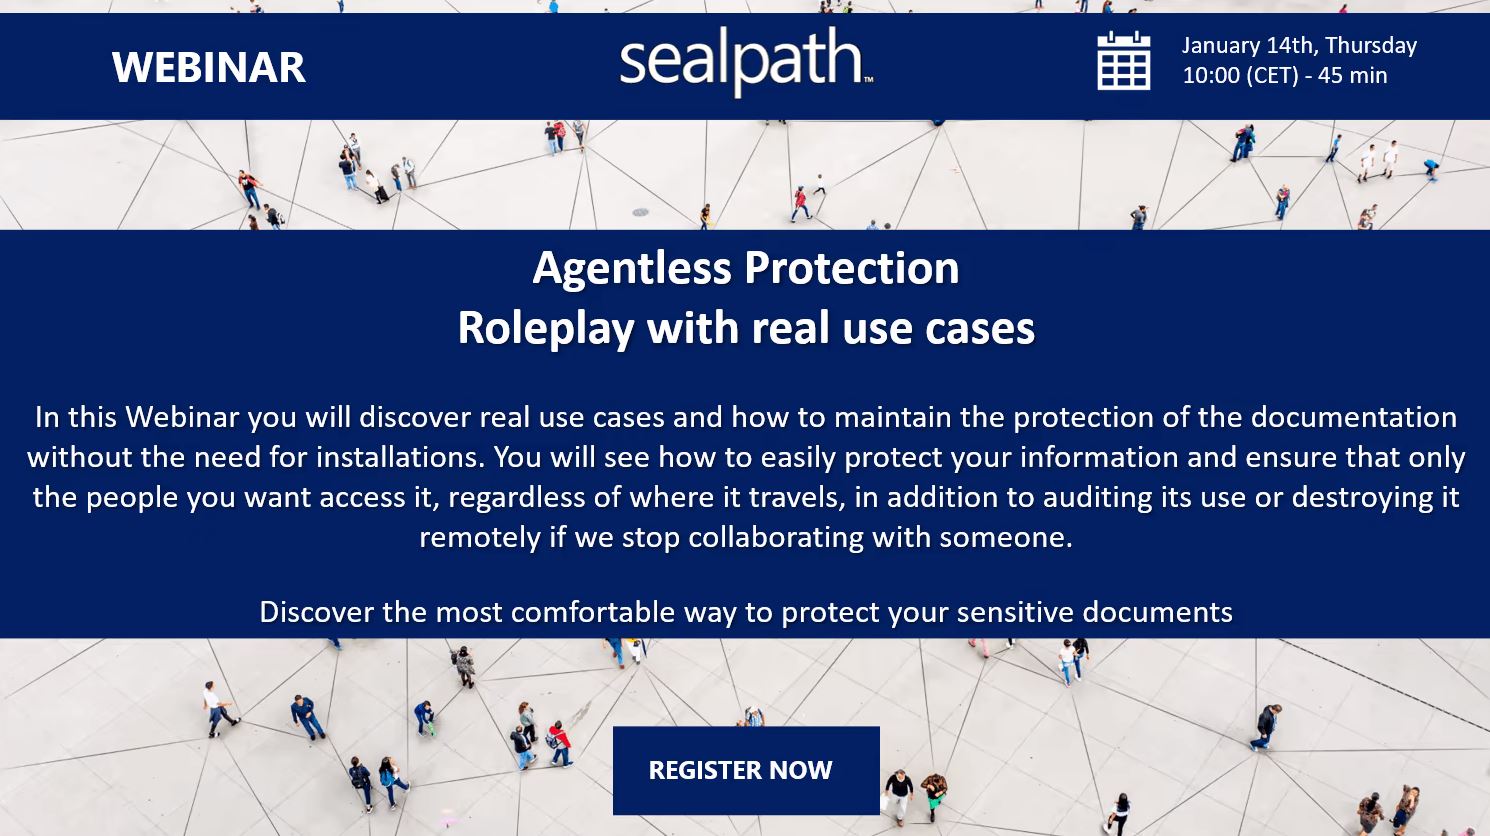 Agentless protection, roleplay with real use cases